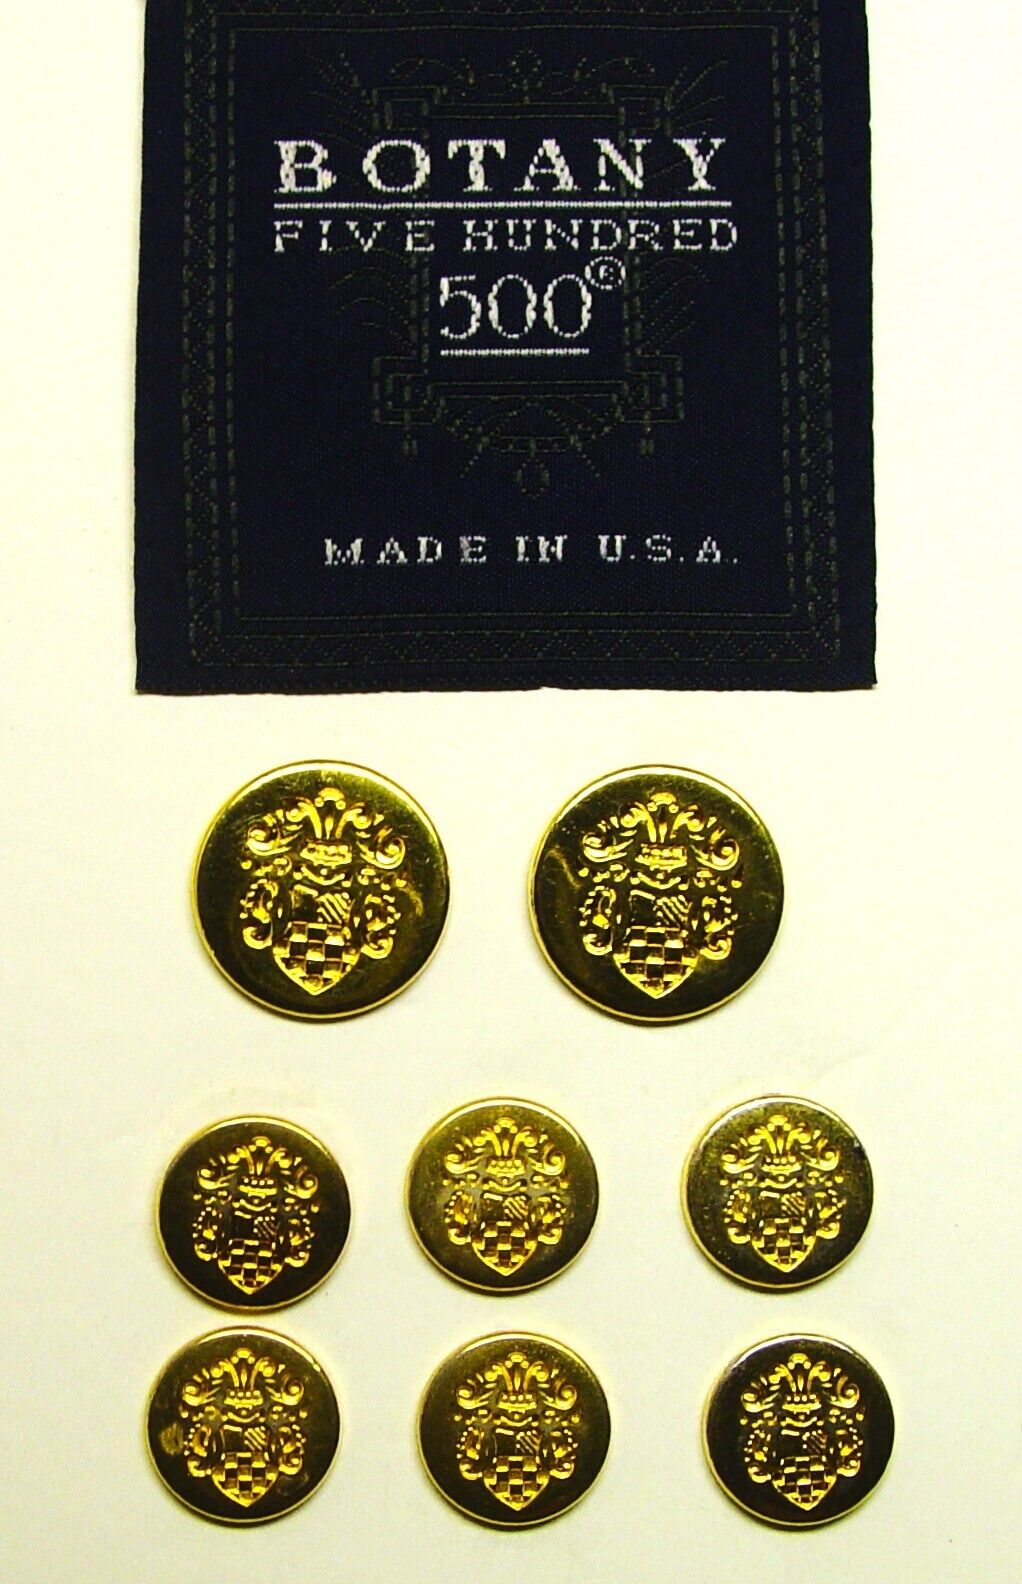 BOTANY 500 Replacement Buttons 8 gold tone solid metal buttons Fair Used Cond.